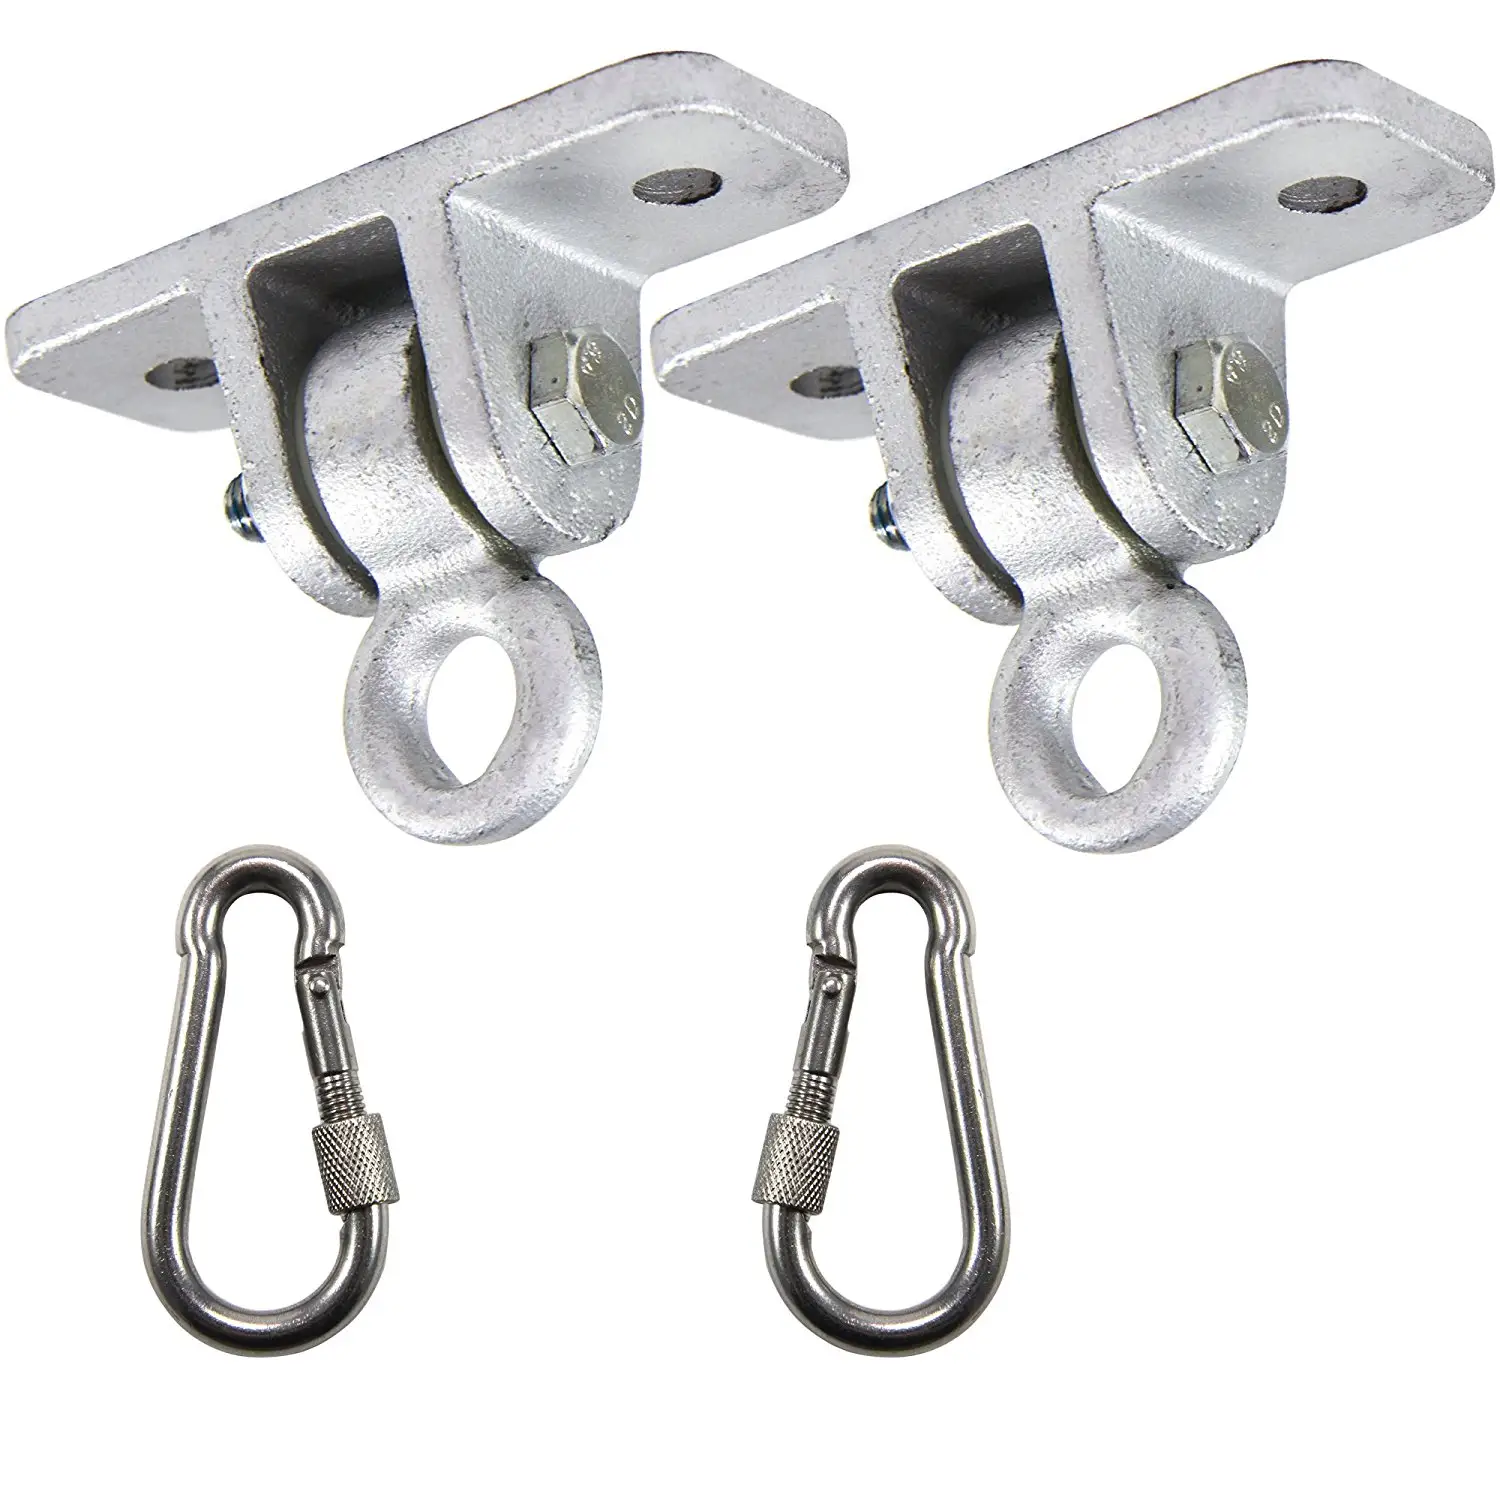 Heavy Duty Swing Hangers For Wooden Swing Sets With Mounting Hardware And Snap Hooks